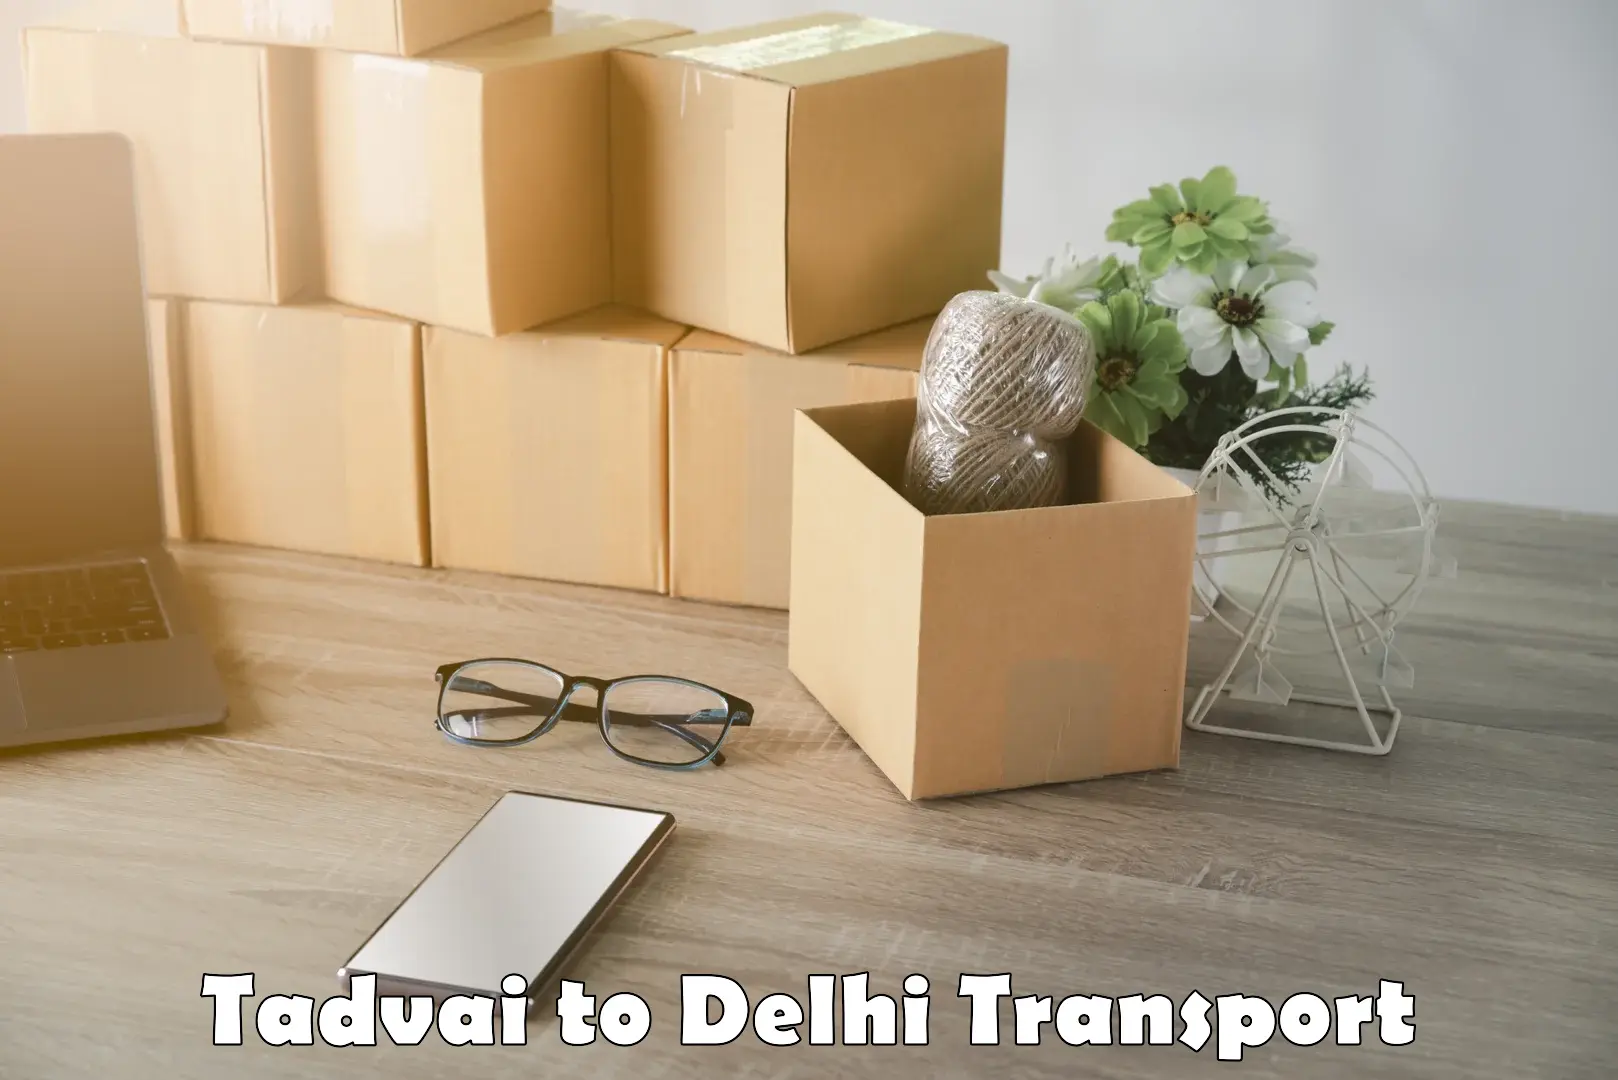 Road transport online services Tadvai to NCR